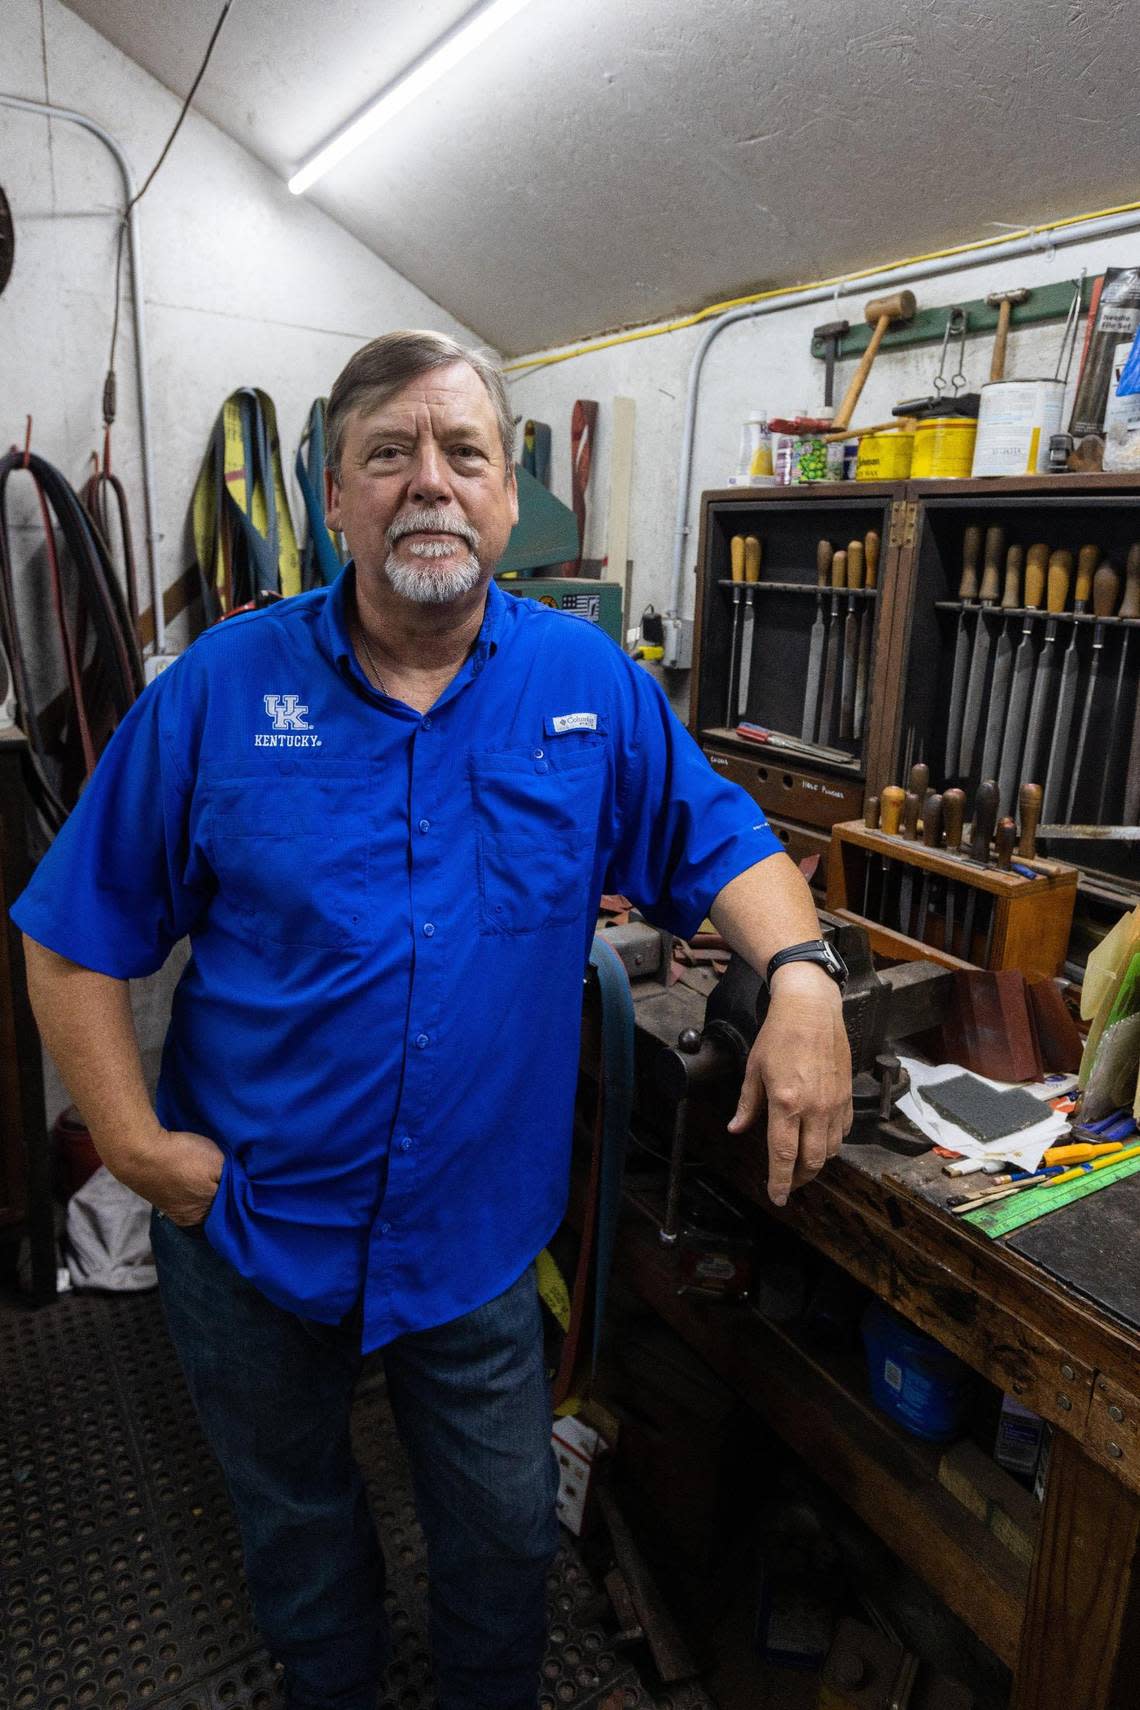 Steve Auvenshine of Bourbon County has made knives for several popular movies like “Jurassic World: Dominion”, the “Jumanji” franchise, and “Star Trek” series. Steve has also specialized in training actors on the use of weaponry. He retired from his work as a state trooper detective and as part of an anti-terrorism task force with the FBI.